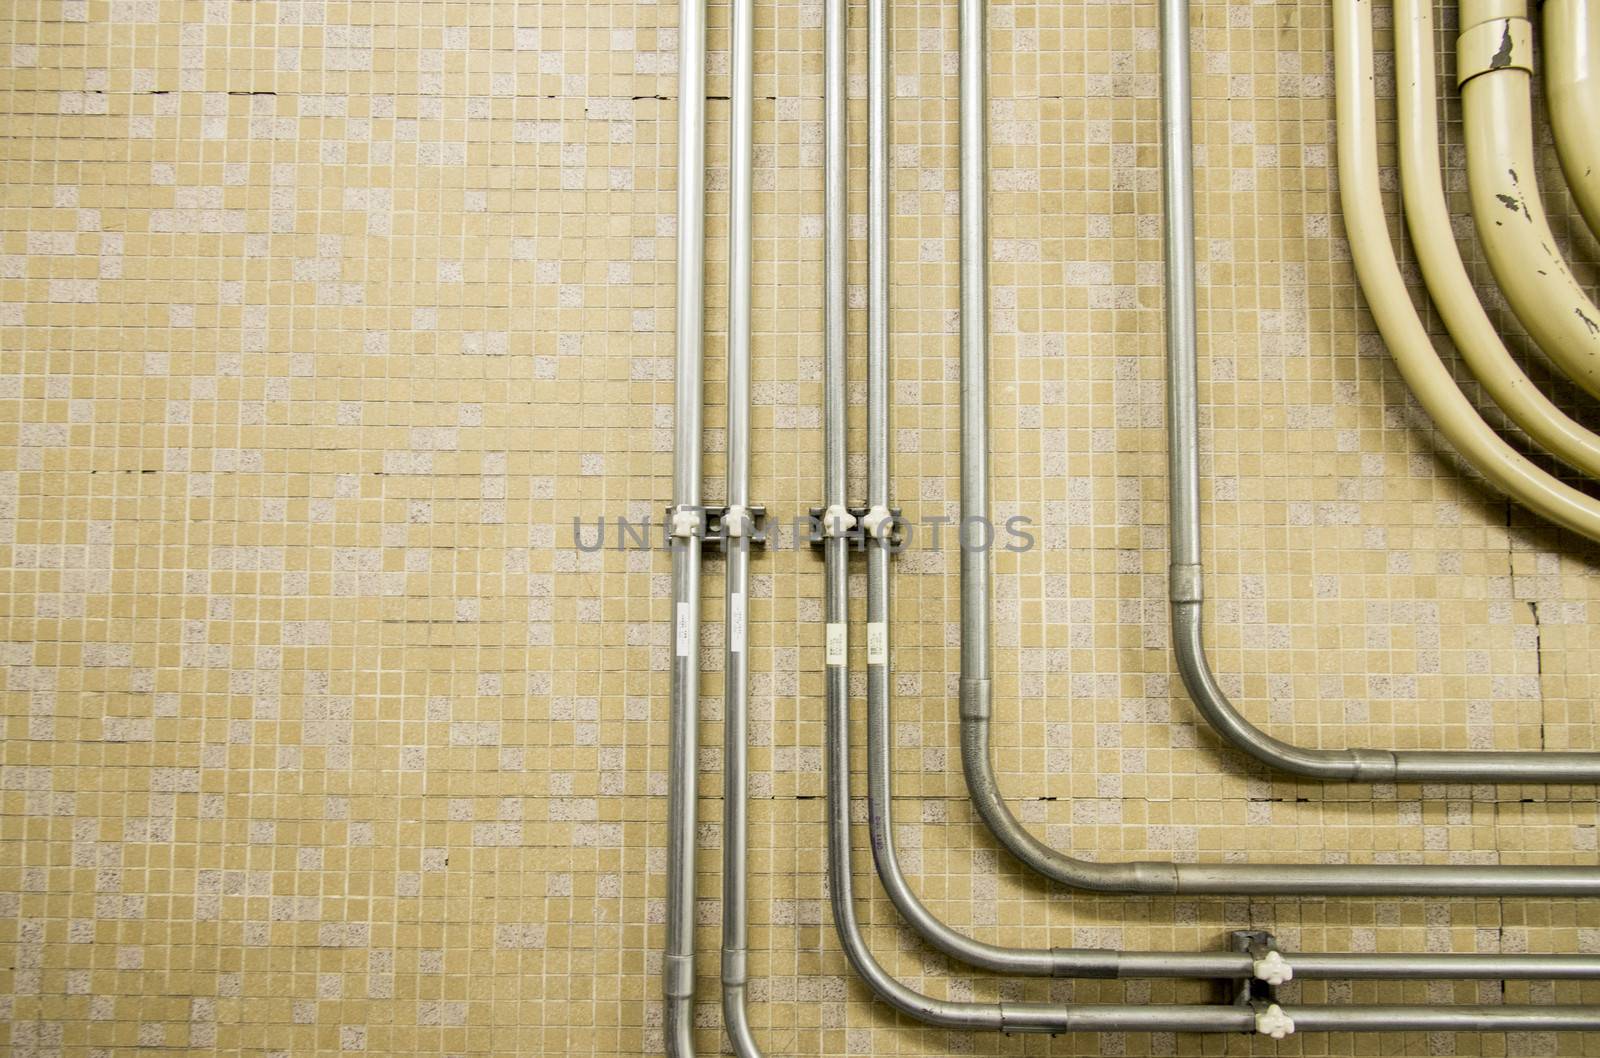 Piping connector on the wall3 by gjeerawut